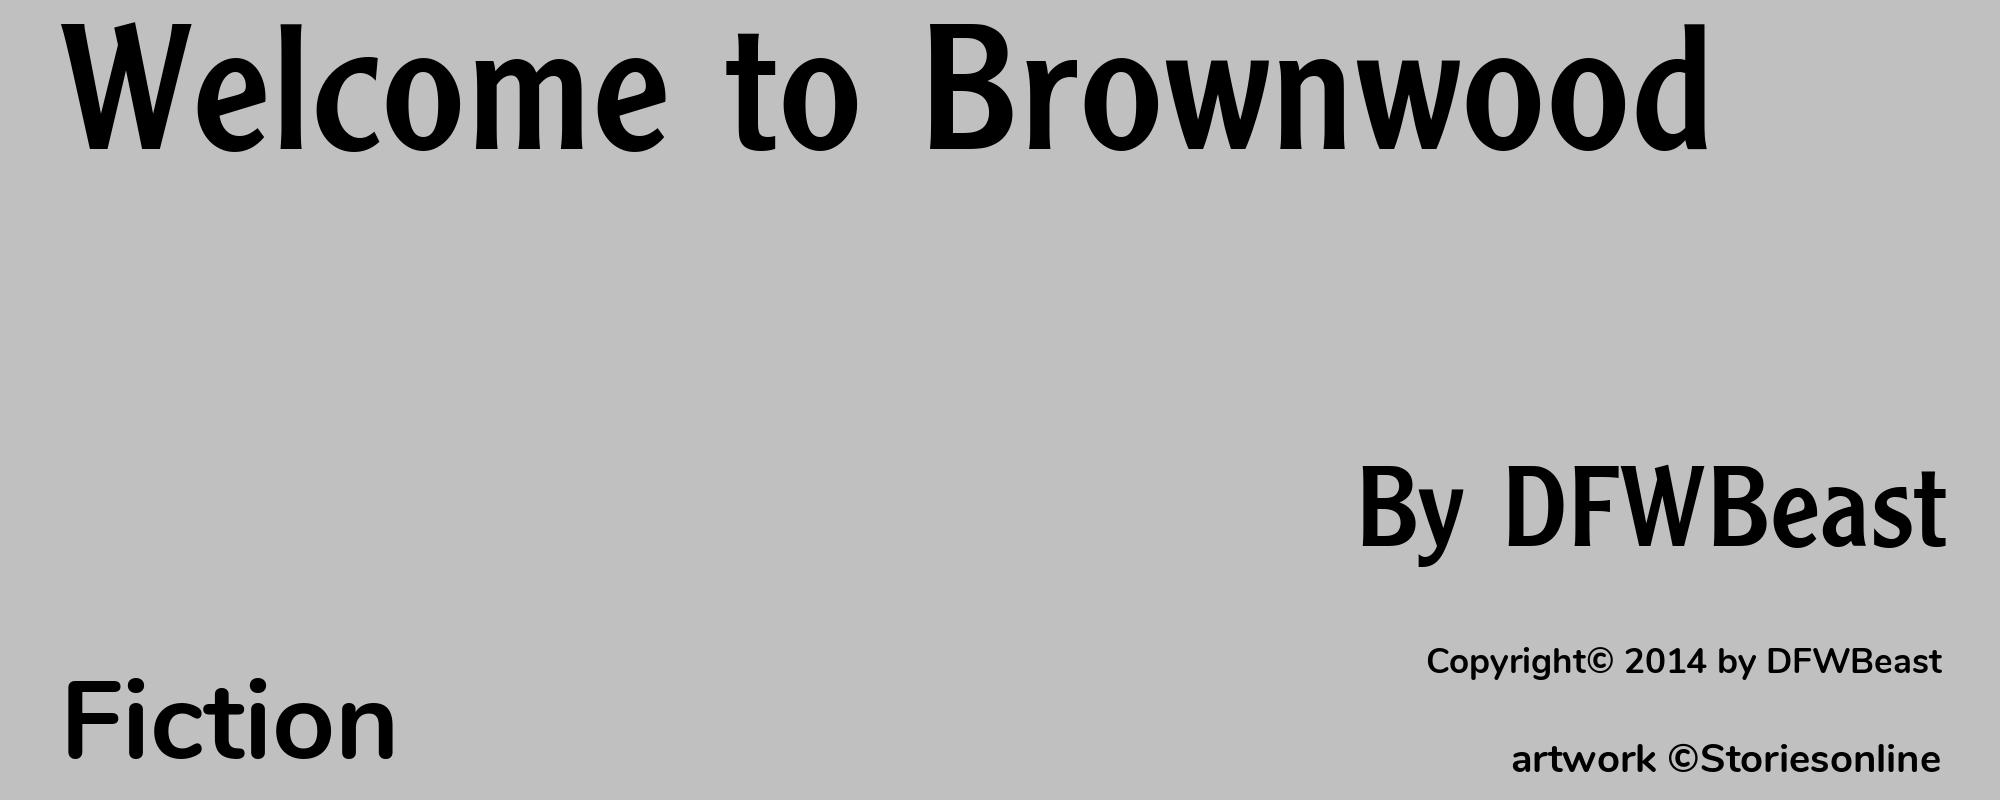 Welcome to Brownwood - Cover